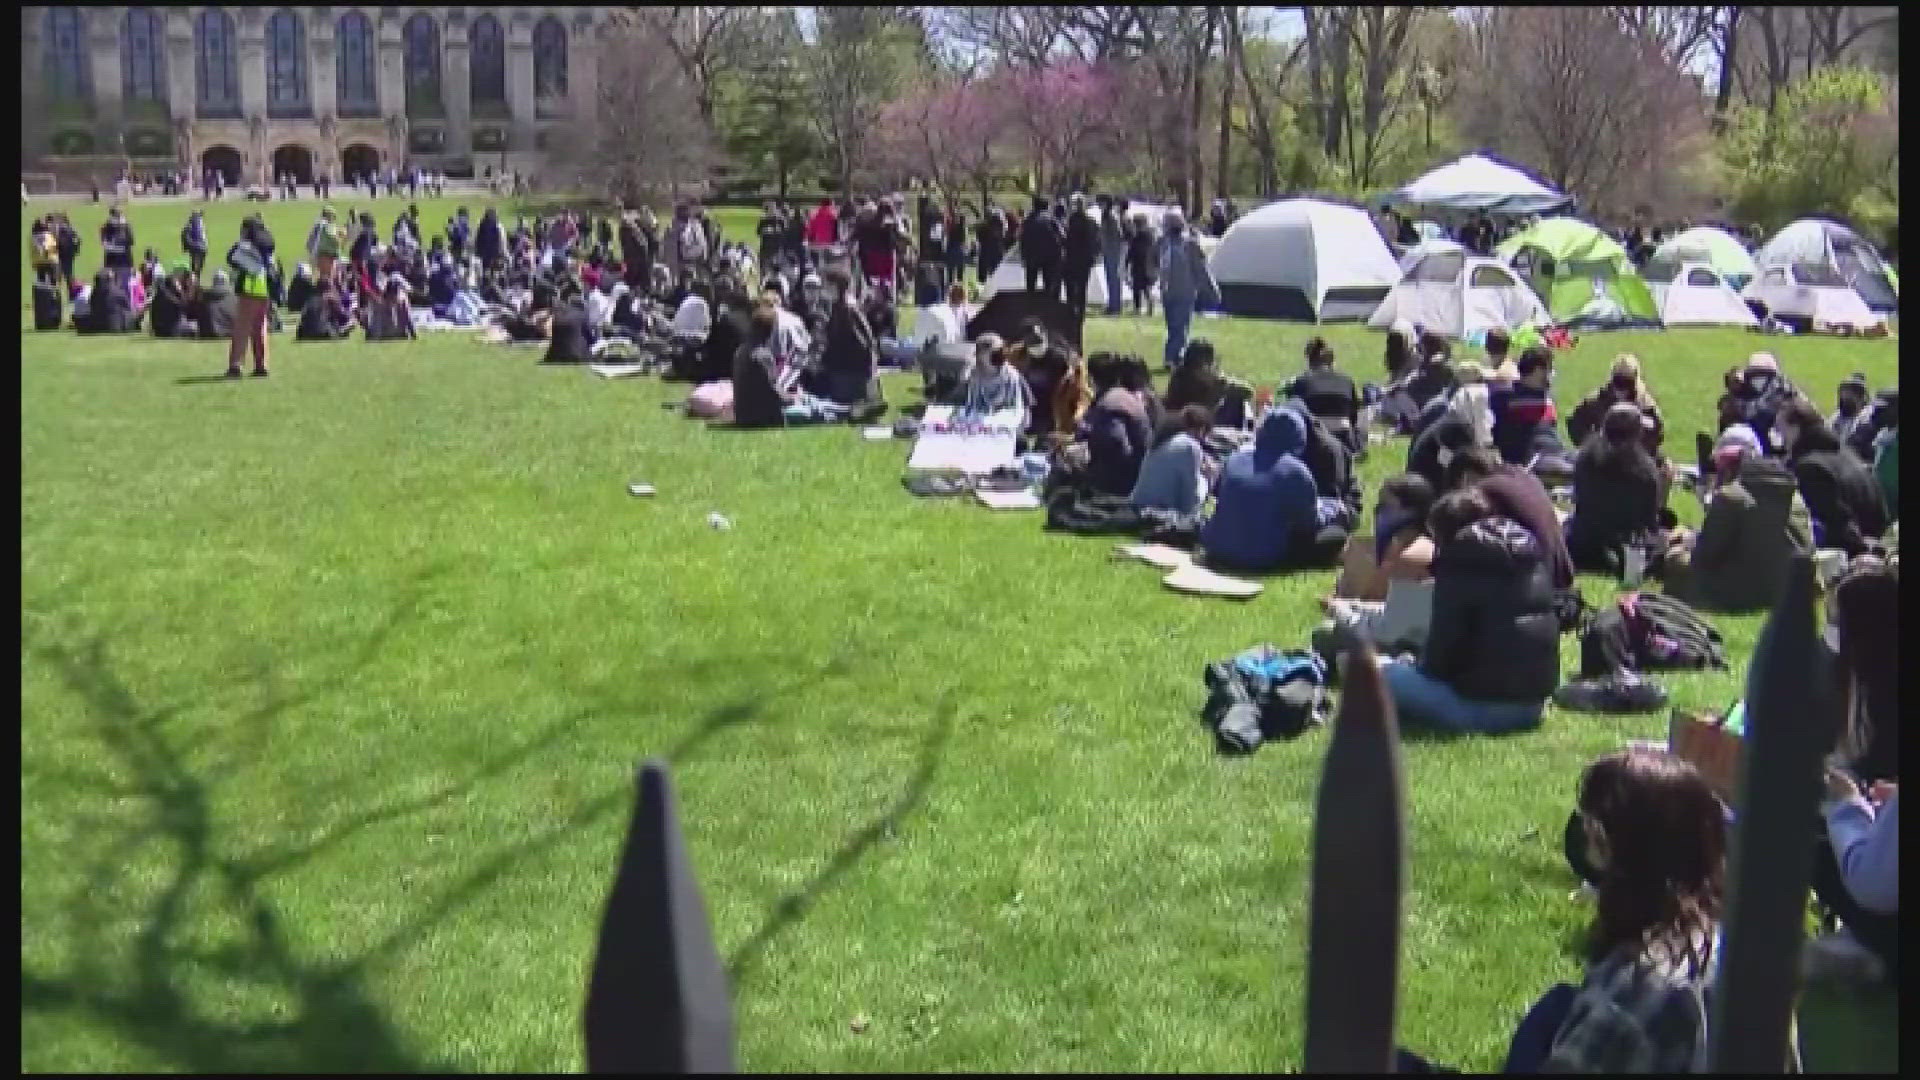 Hundreds of students have set up camp at the campus' open space known as Deering Meadow.